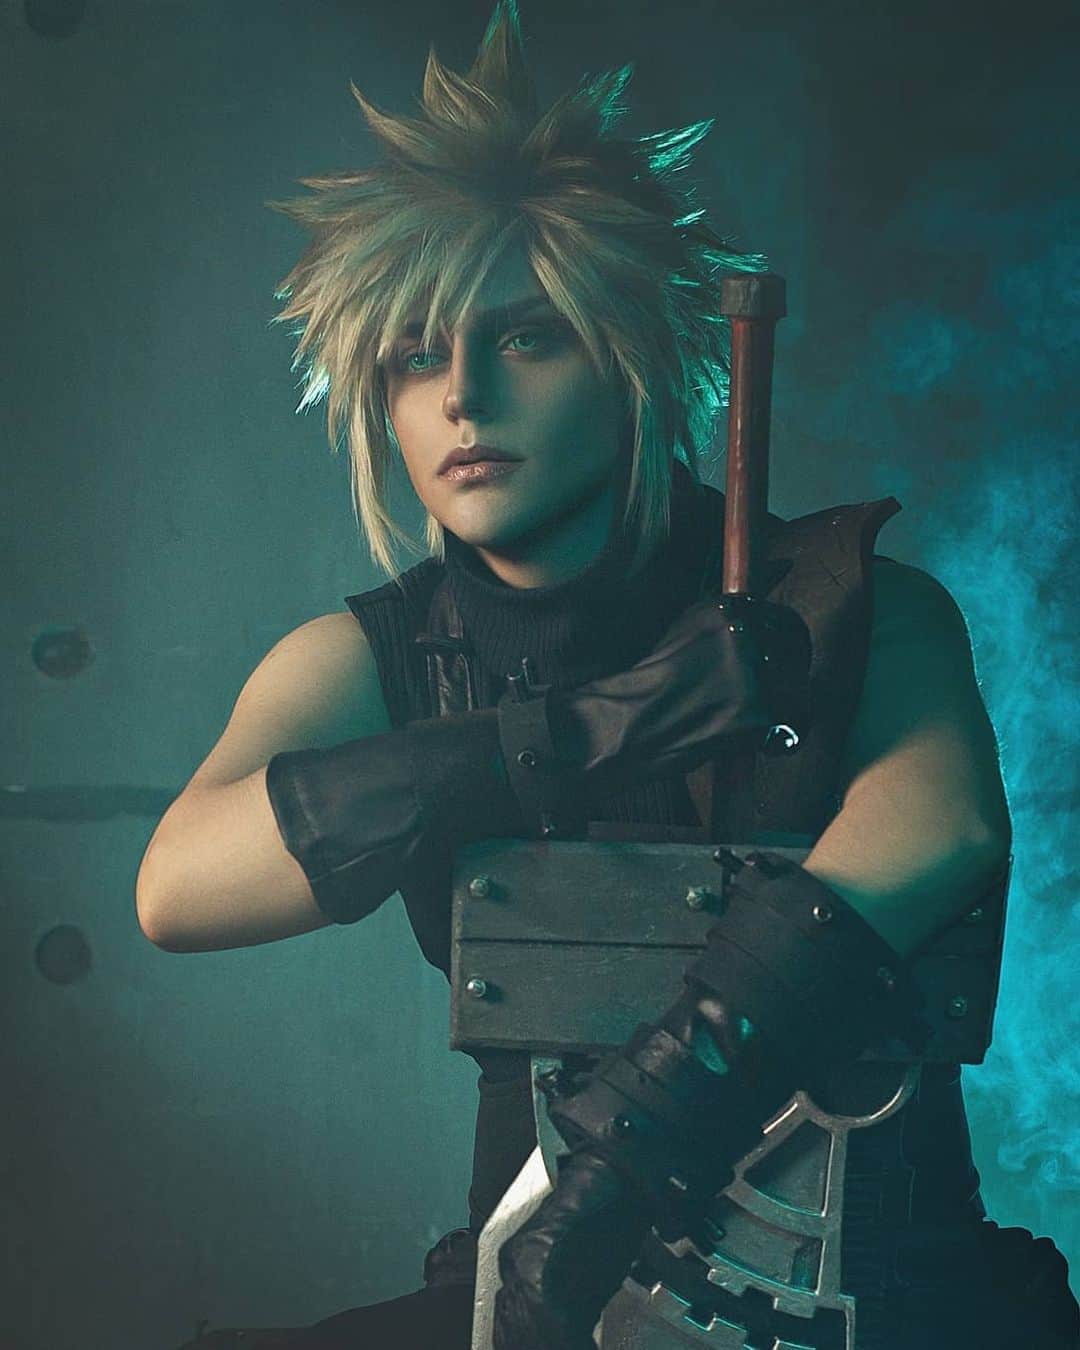 Gesha Petrovichのインスタグラム：「Uuuhuuu😜 New cosplay and Big announcement🎉🧧  #CloudStrife from #finalfantasy7remake  Waiting so long and now showed 😏😏🙏 Happy to announce new calendar for 2021🎉🎉🎉🎉🎉🎉🎉🎉🎉🎉🎉🎉🎉🎉🎉 Now available pre-sale A4 and A3 size (free shipping until Monday 😜) Order here👇 https://www.etsy.com/listing/745729467/gesha-cosplay-2021-calendar-best-shoot For my Patrons 25tier( special free calendar) and for 50+tier (a3 calendar for free) in this month 😏 Announcement for 16+Fanservise calendar will in sunday ❤️😏 Ph @kira_rayne.ph Wig @geshacos  Wig base and contacts @assistwig0726 #ff7re #finalfantasy #cosplay #malecosplay #mensportrait」